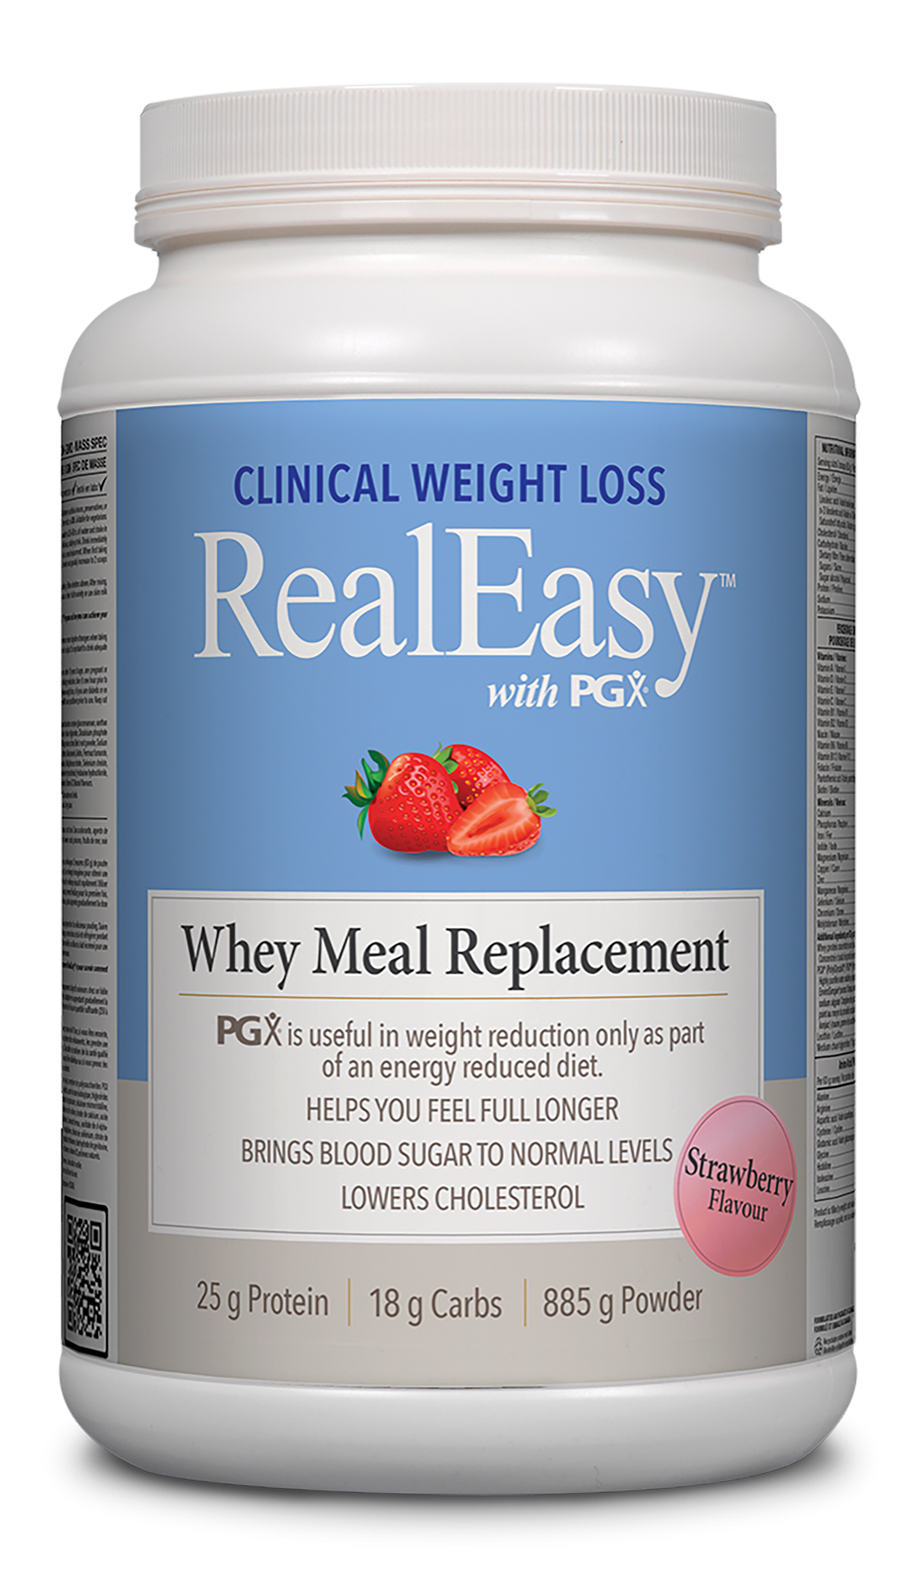 Natural Factors RealEasy with PGX Whey Meal Replacement, Strawberry Flavour 885 g Powder